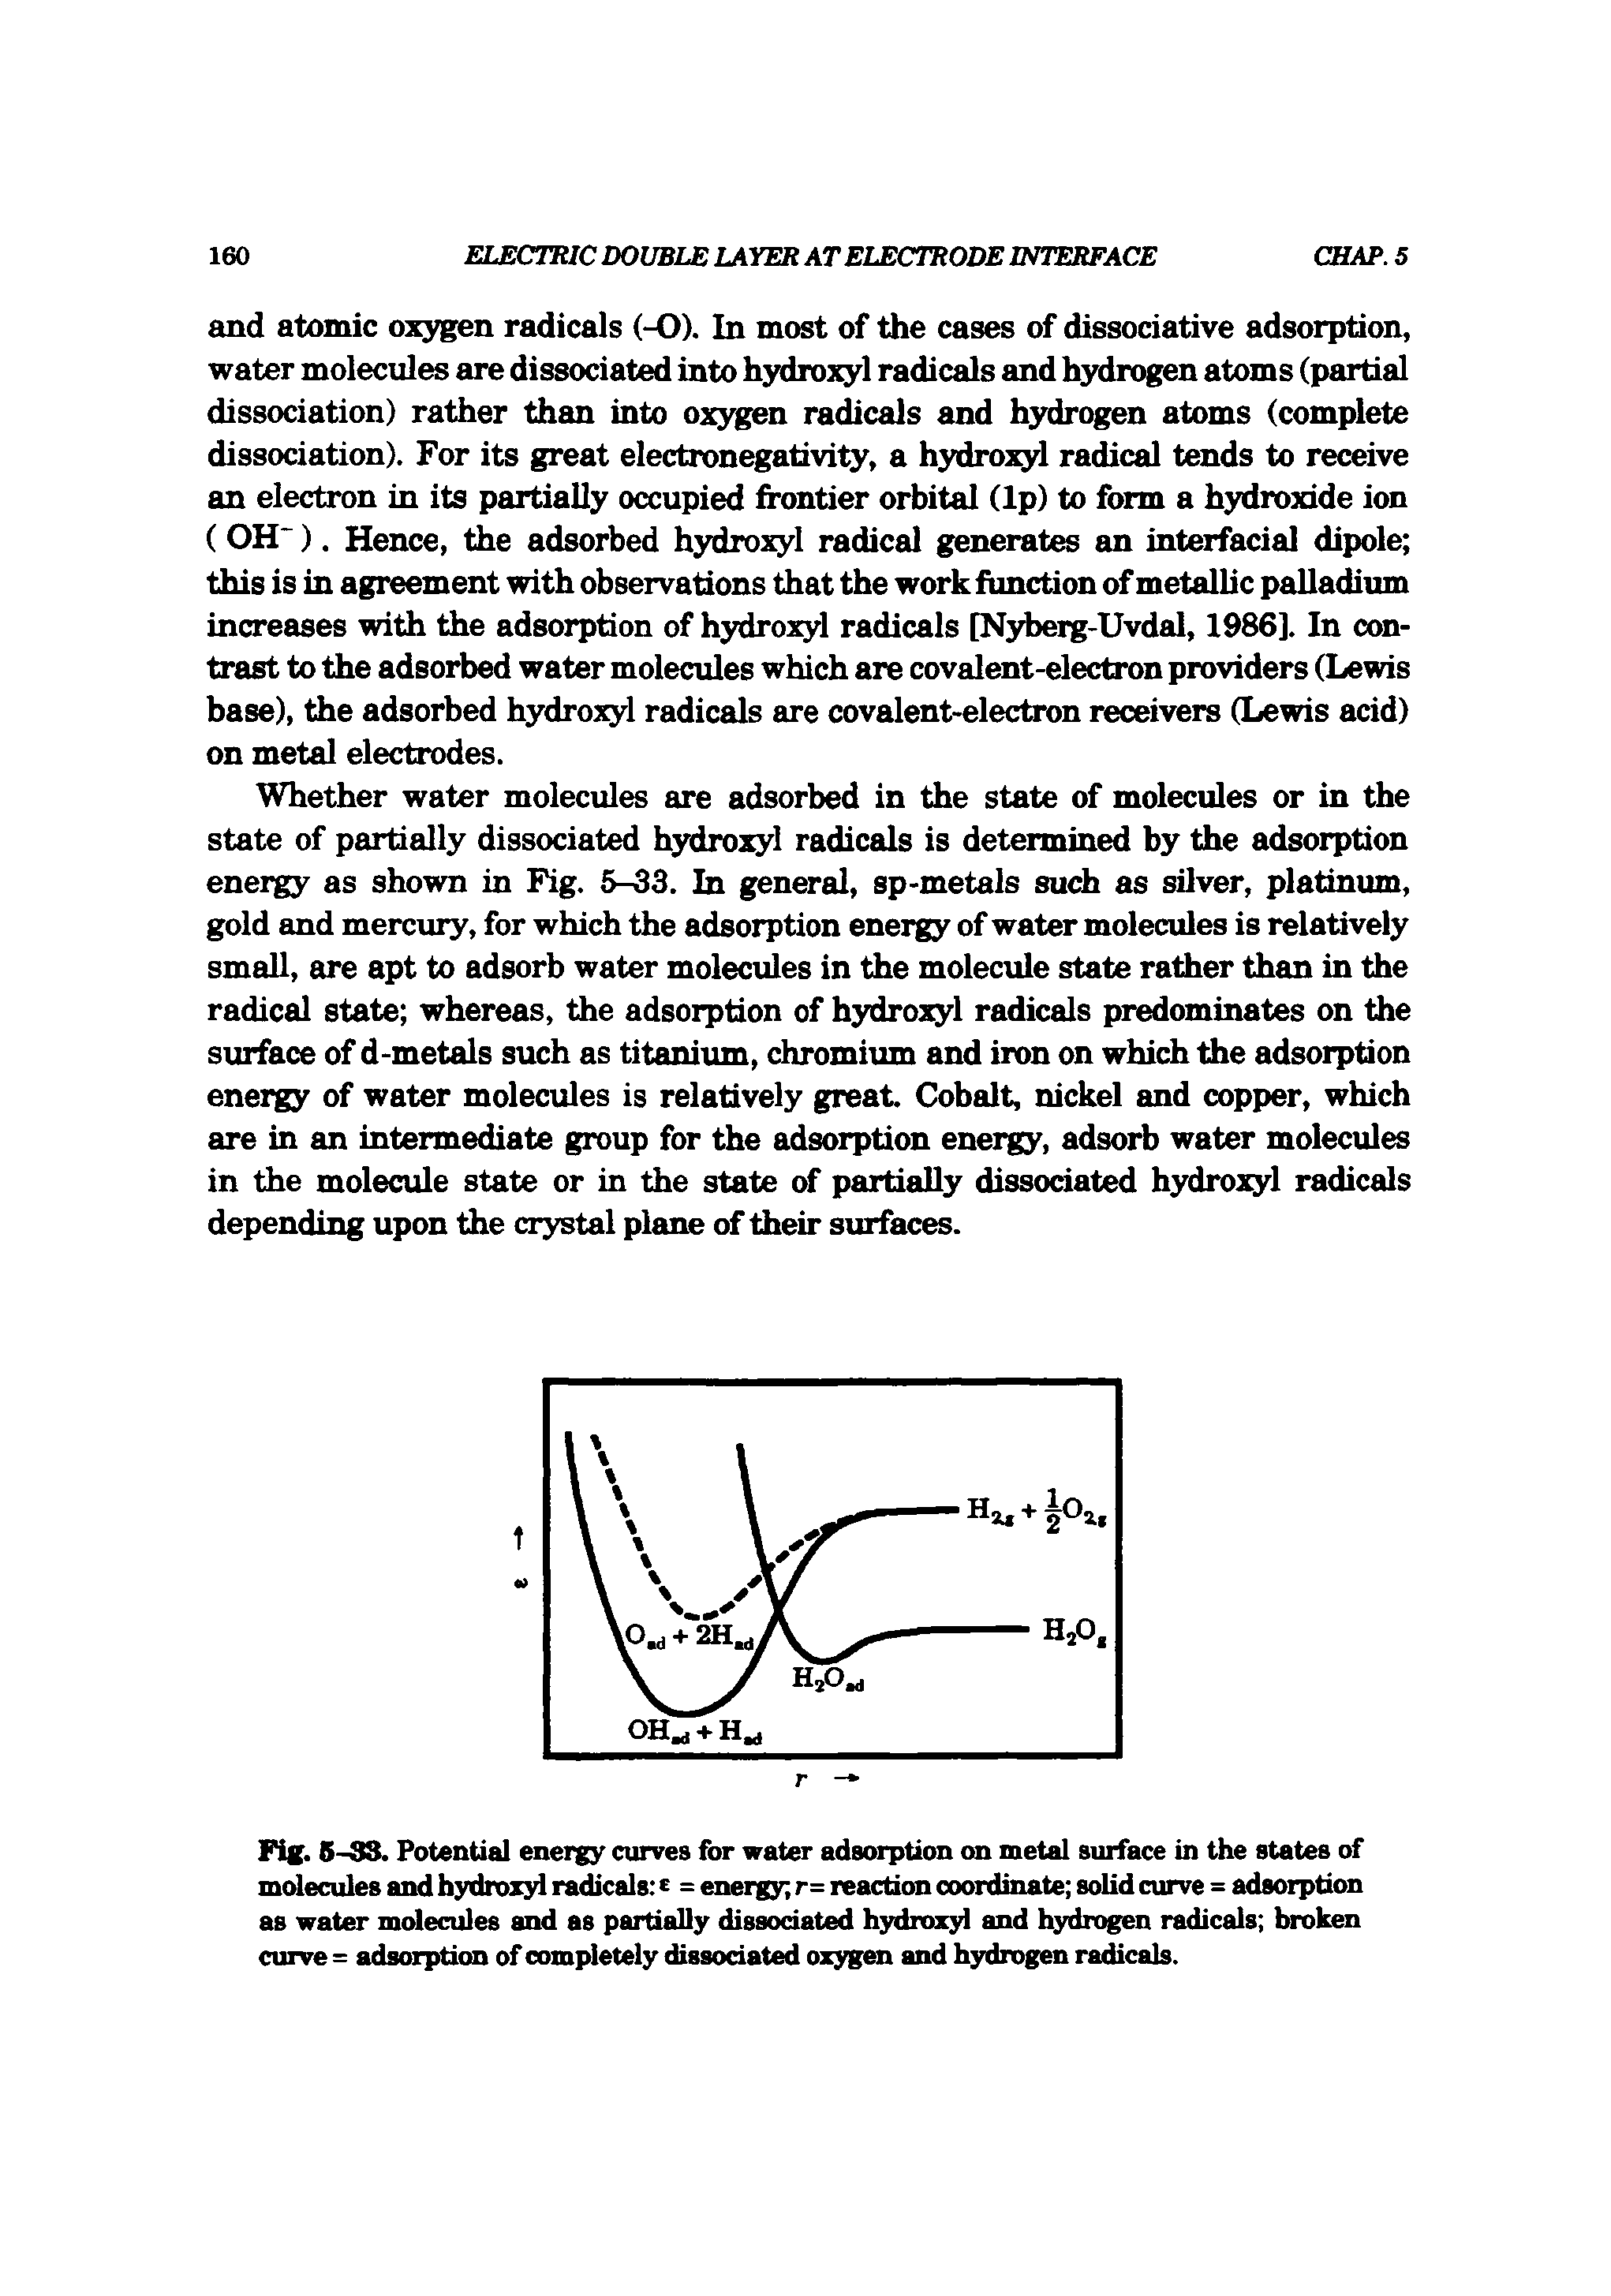 Fig. 6-3S. Potential energy curves for water adsorption on metal surface in the states of molecules and hydrozjd radicals c = energy r = reaction coordinate solid curve = adsorption as water molecules and as partially dissociated hydroxj4 and hydrogen radicals broken curve = adsorption of completely dissociated oxygen and hydrogen radicals.